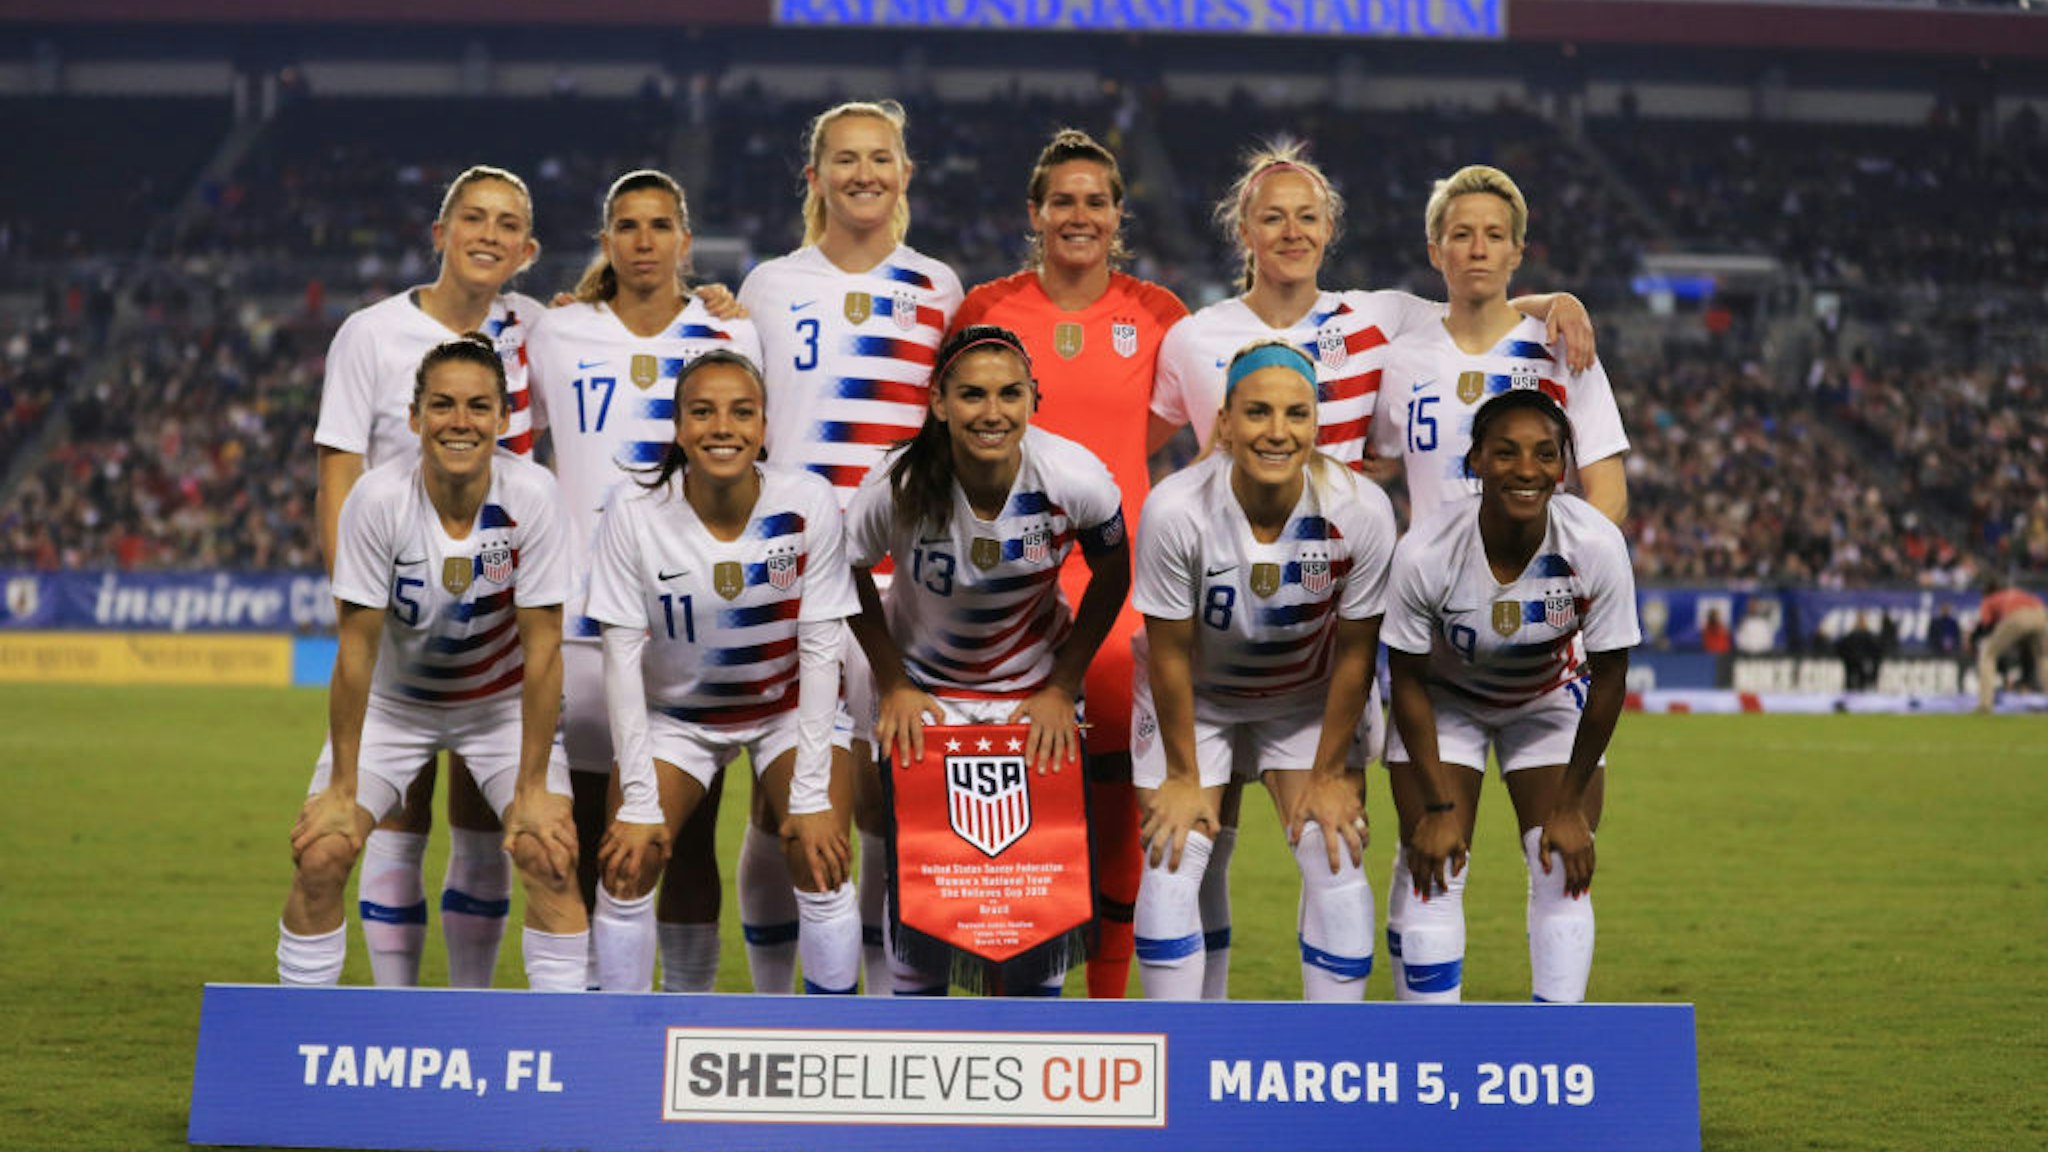 The USA Women's National team poses before a game against Brazil during the She Believes Cup at Raymond James Stadium on March 05, 2019 in Tampa, Florida.